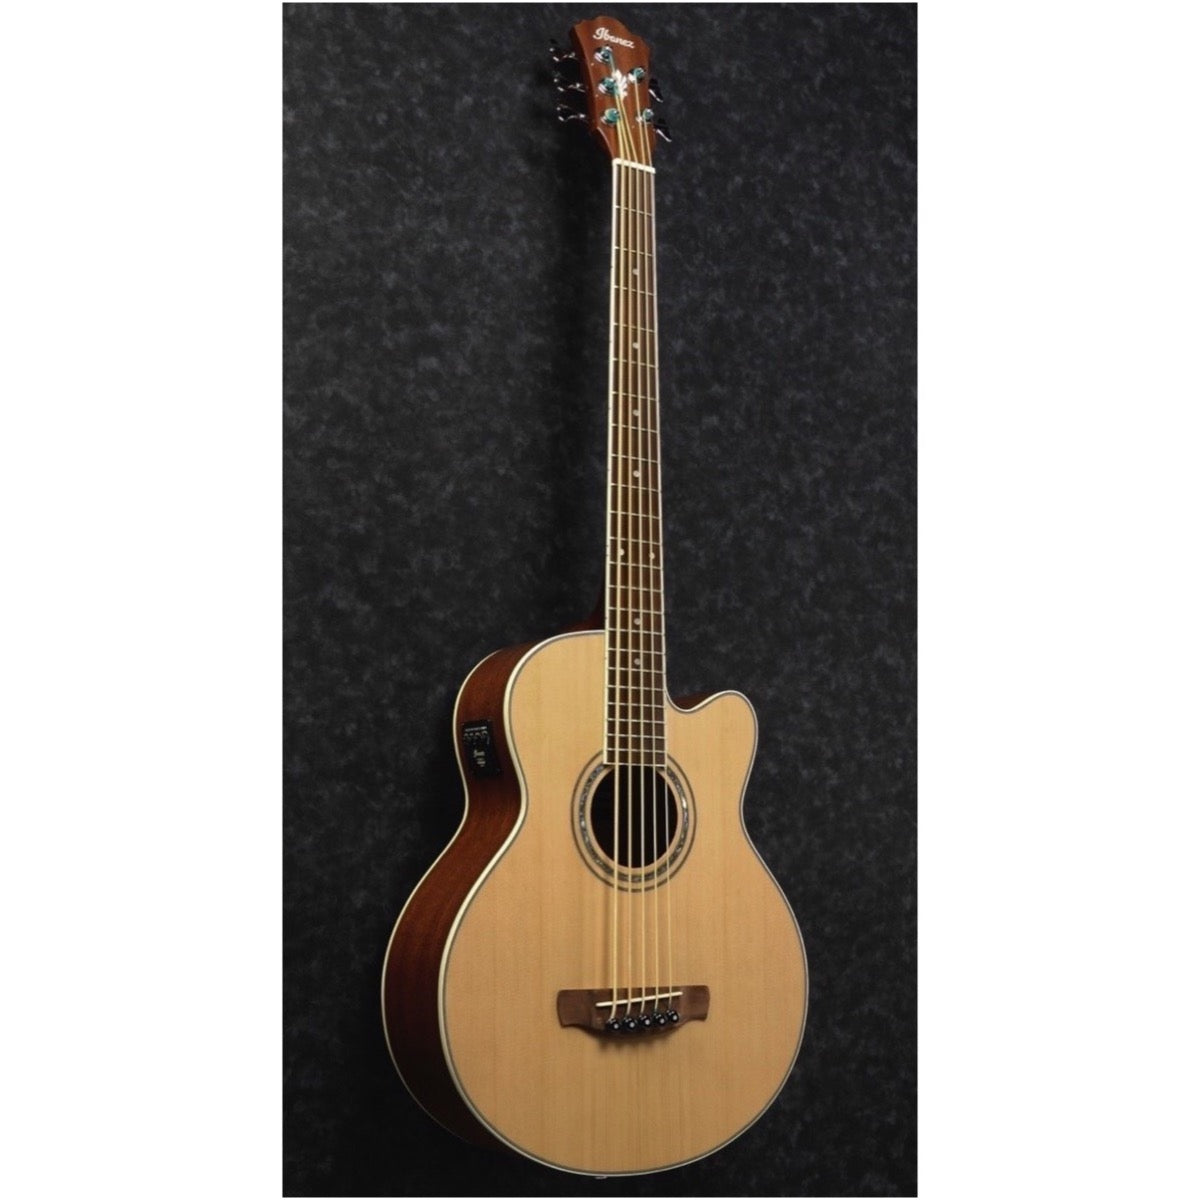 Day　Same　Bass,　Ibanez　–　AEB105E　High-Gloss　Acoustic-Electric　5-String,　Natural　Music